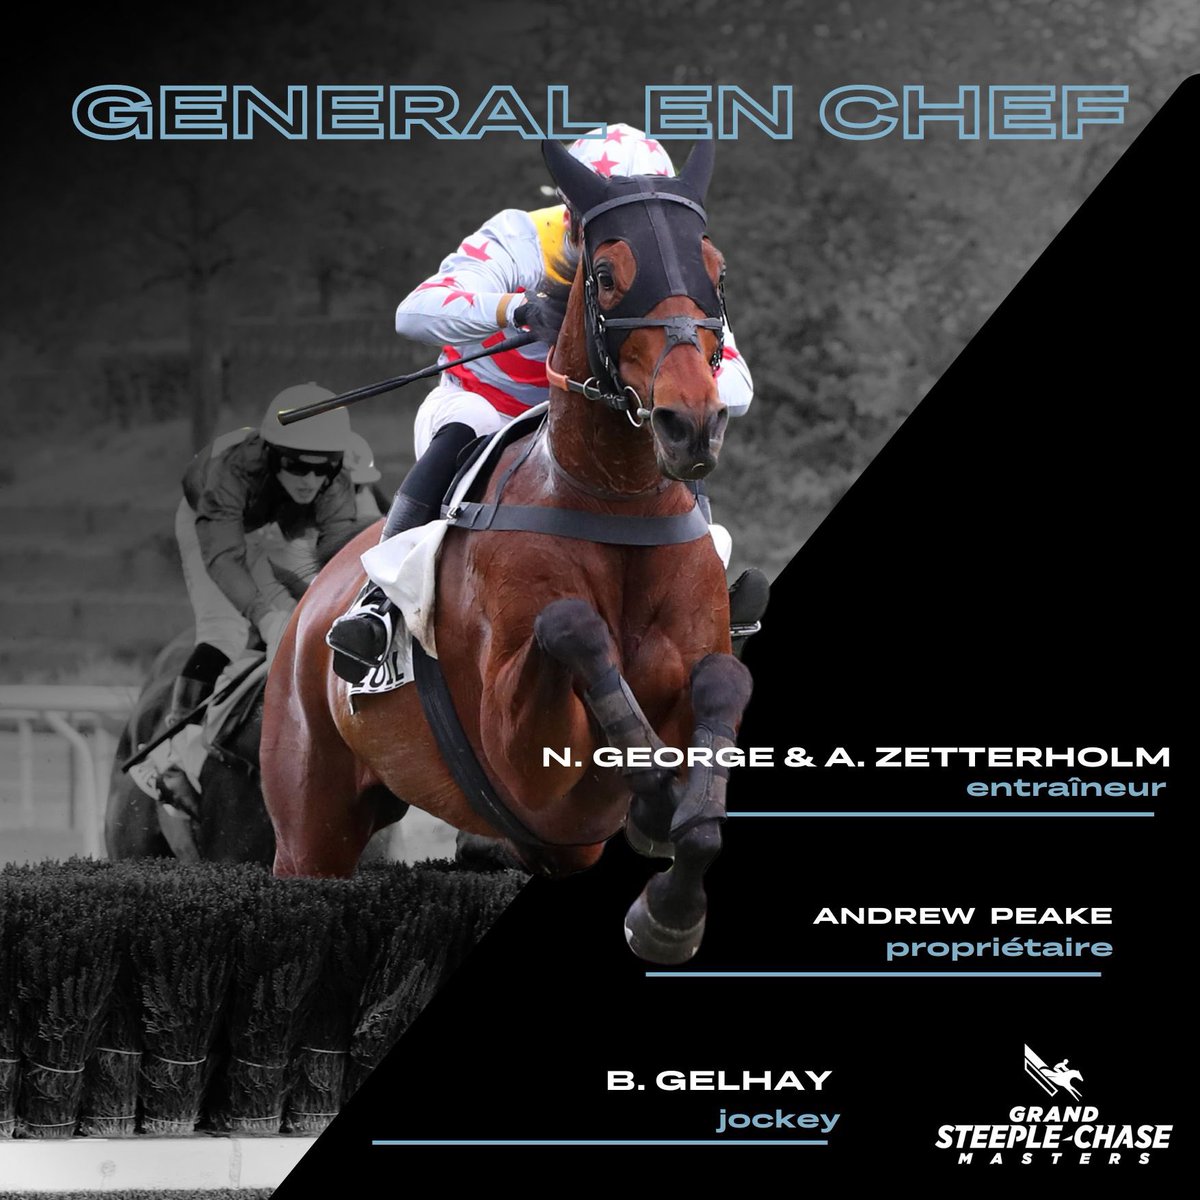 Watch General en Chef have his final schooling session in preparation for tomorrows run at Auteuil in the Gr 2 GRAND STEEPLE-CHASE MASTERS - PRIX INGRE ✨🌟💪 youtu.be/dCMr8j7Zwfk #NGAZracing #georgezetterholmracing